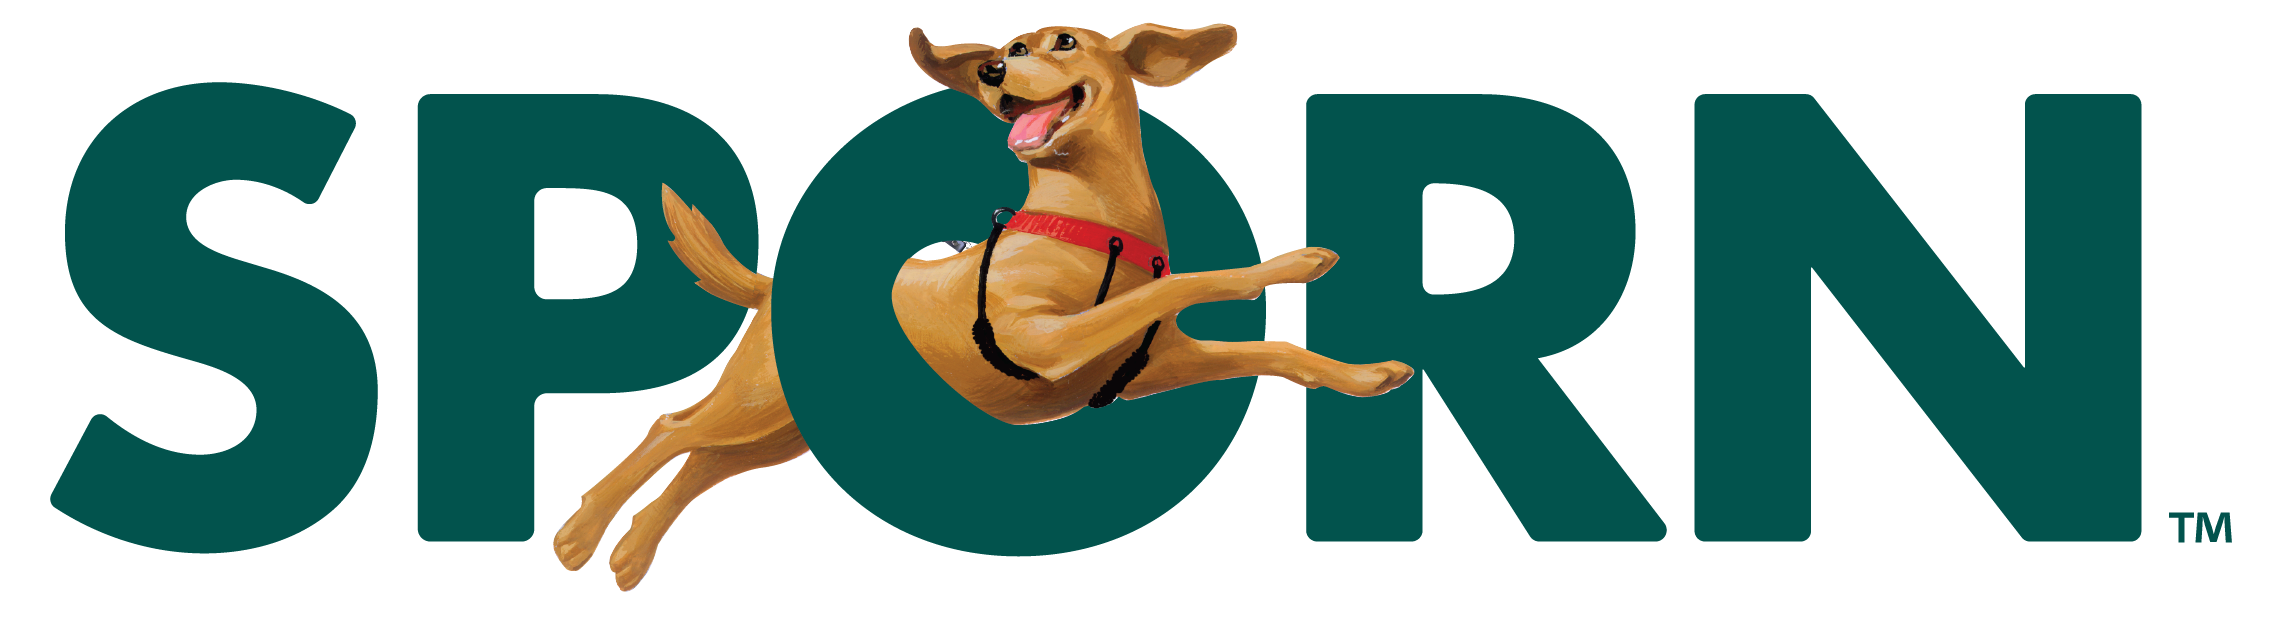 Sporn Please Com - THE SPORN COMPANY PRESENTS AN EXCITING NEW RANGE OF DOG HARNESSES AND  ACCESSORIES